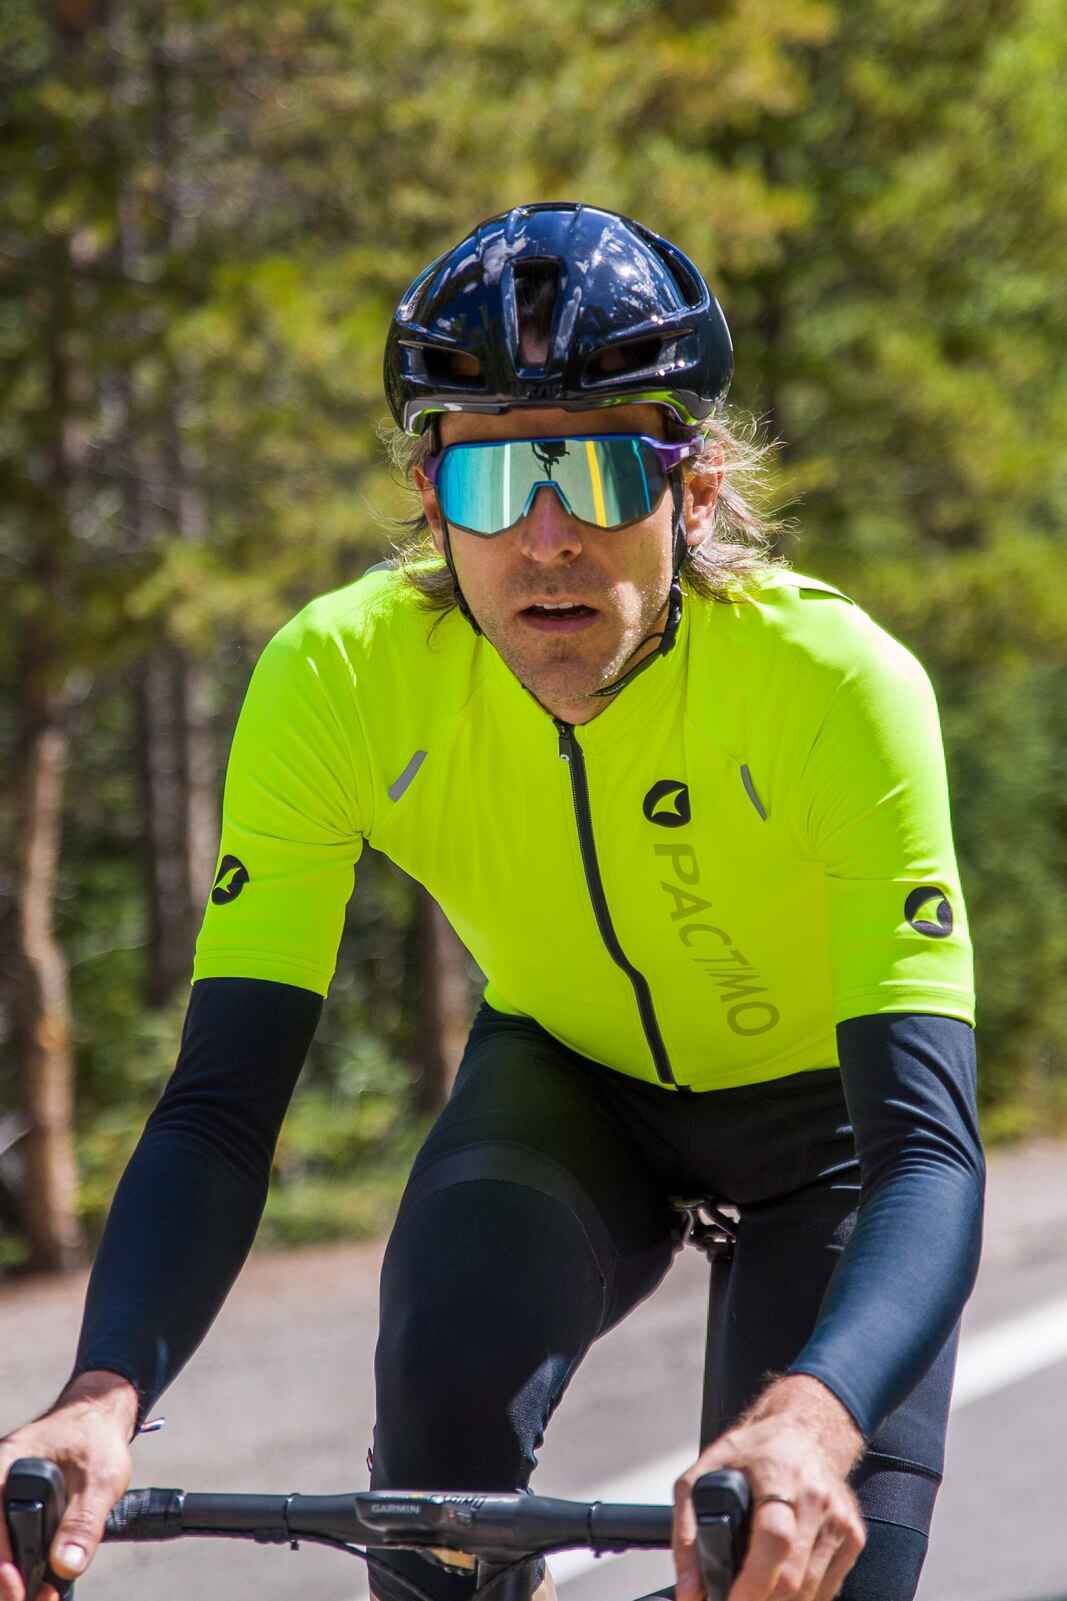 Men's Winter Cycling Bibs - On the Road